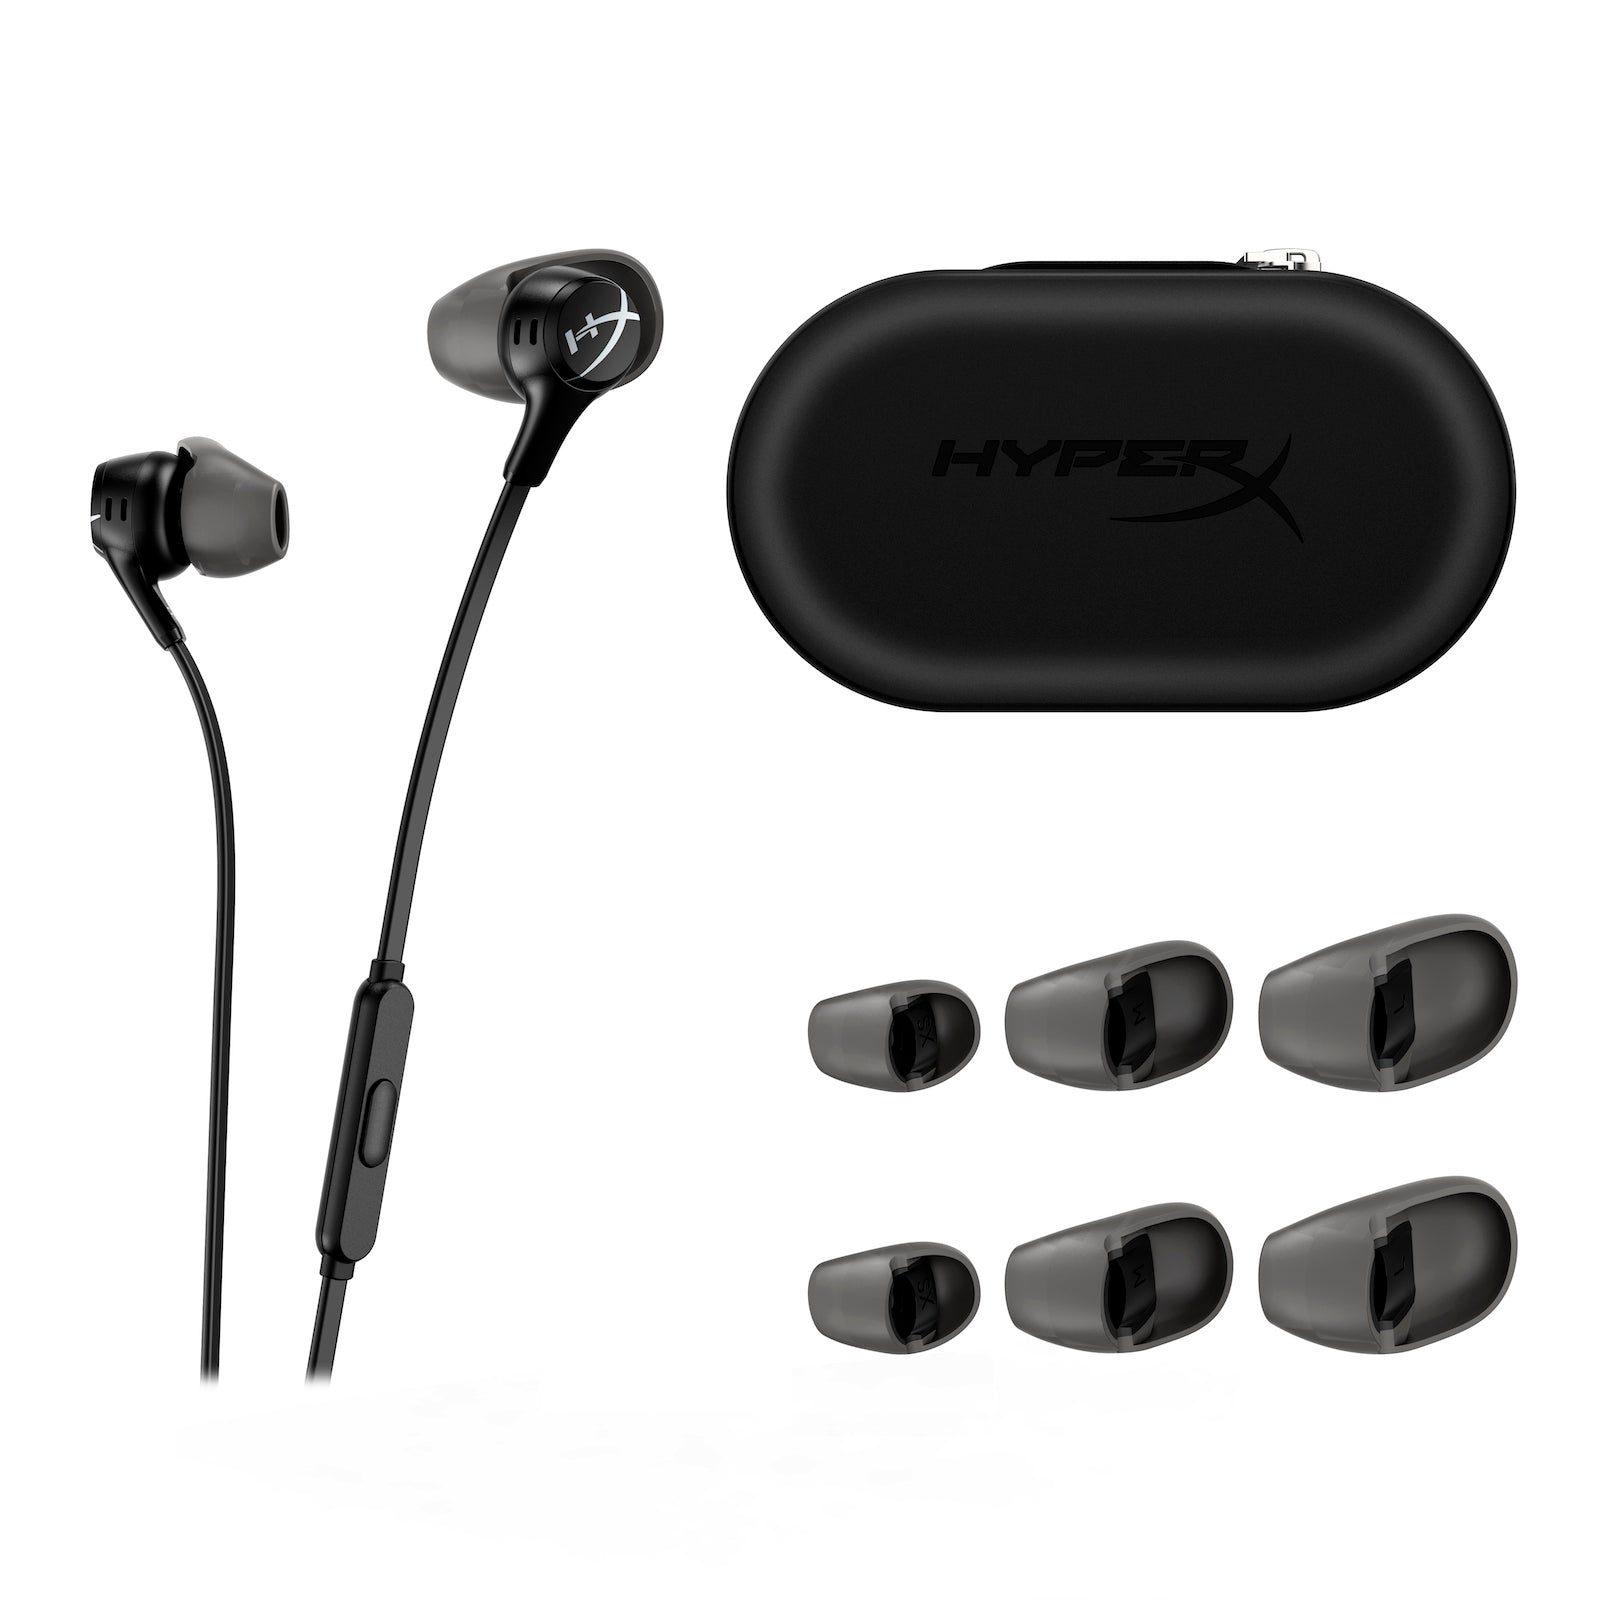 Front view of the HyperX Earbuds II Black accessories and contents